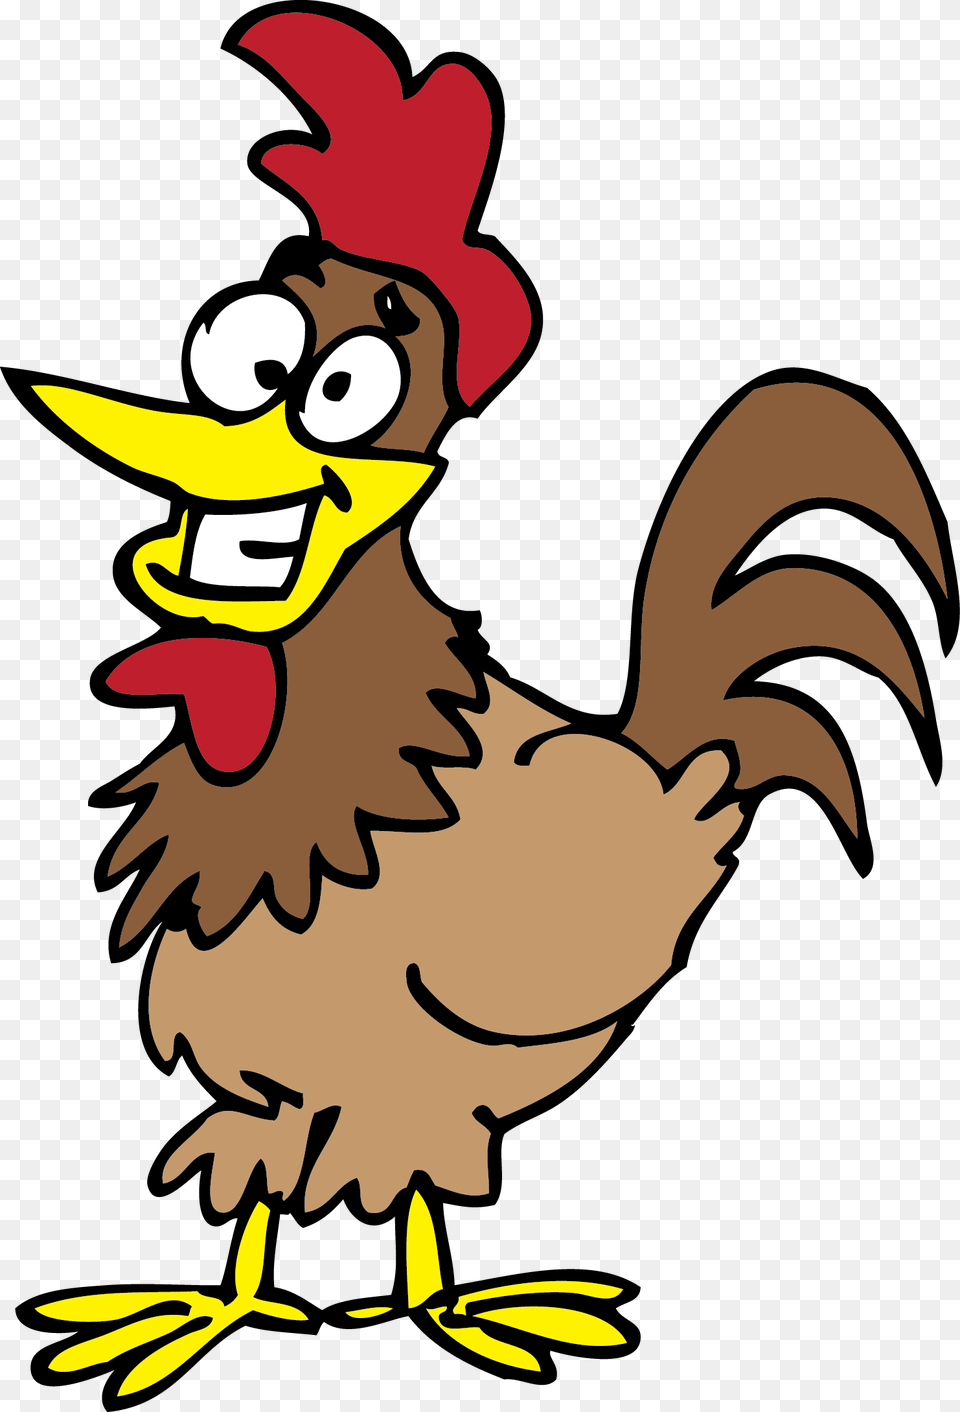 Chicken Forced Beyond Belief The Human Condition Nature Chicken Cartoon File, Animal, Bird, Fowl, Poultry Free Transparent Png